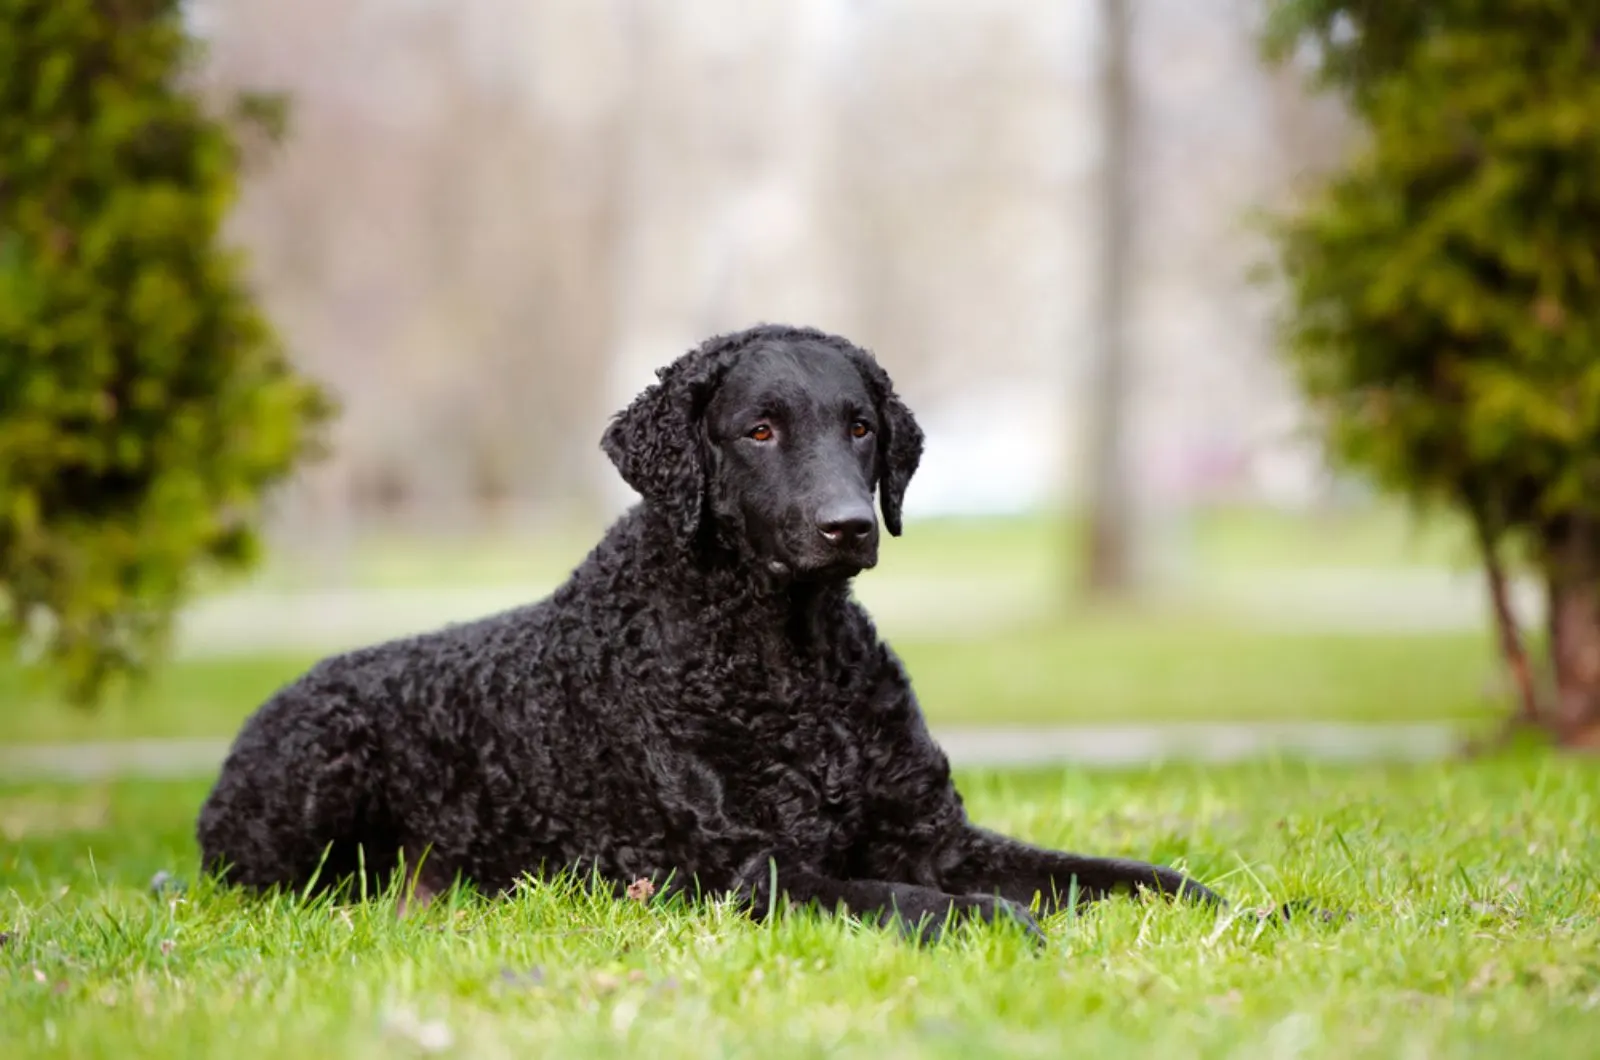 curly-coated retriever lying on the grass